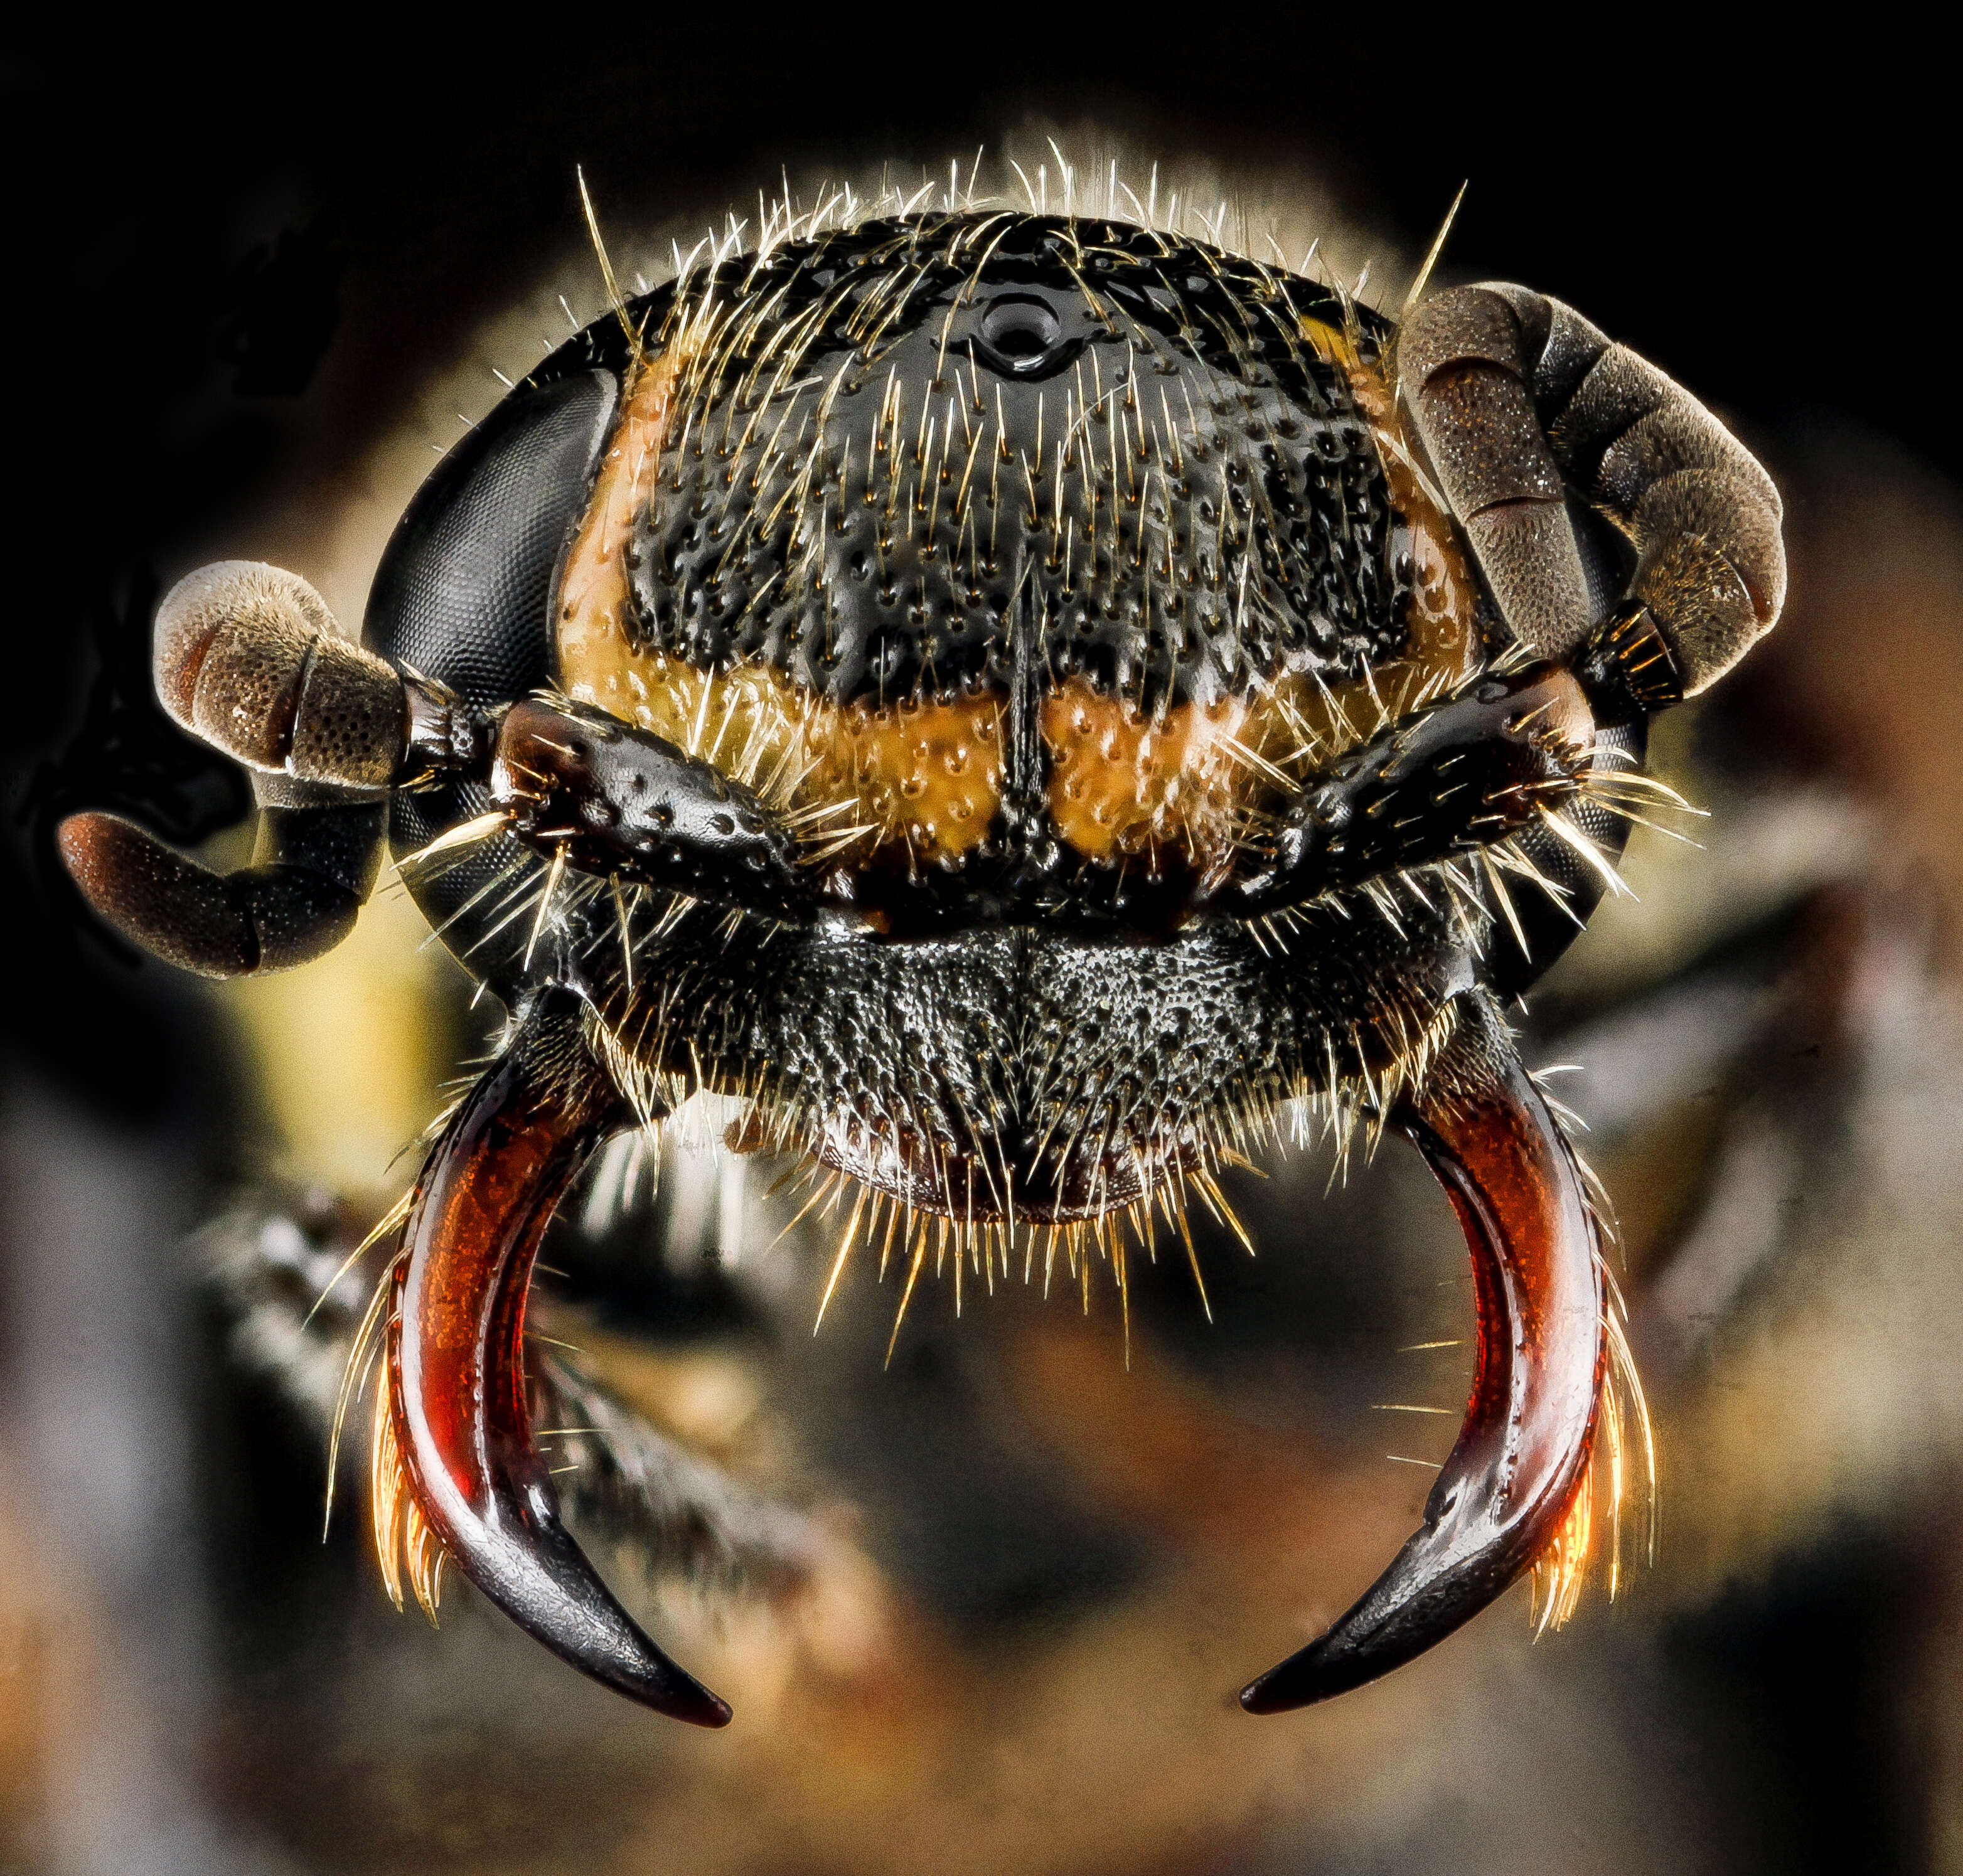 Image of thynnid wasps